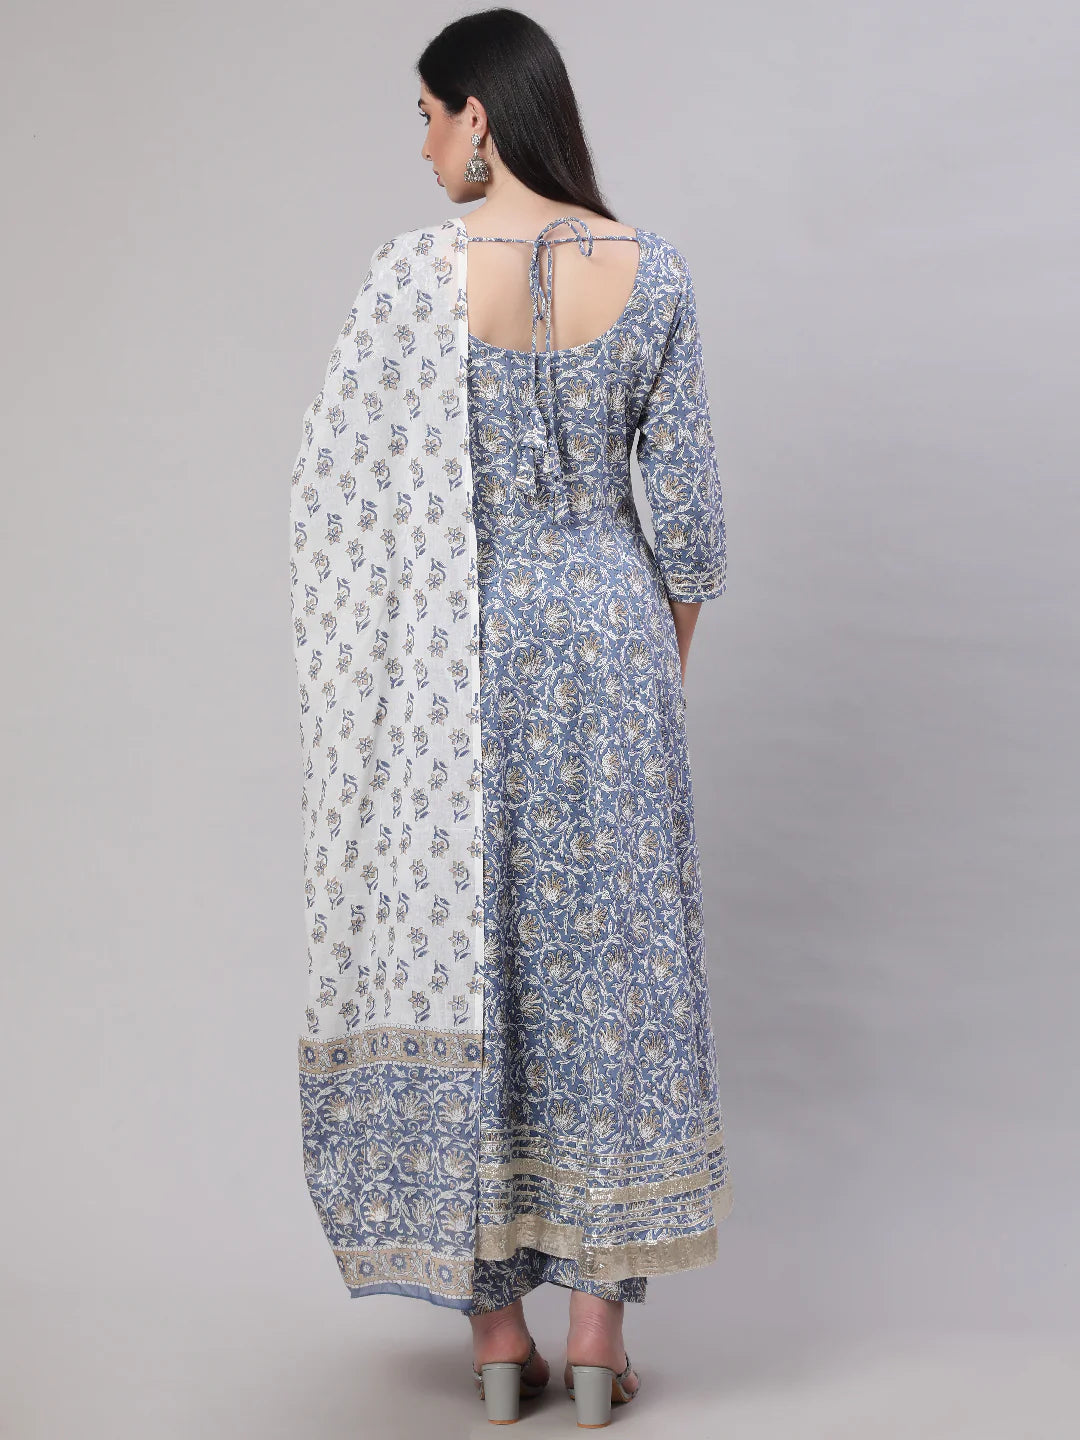 Grey & White Floral Printed Pure Cotton Flared Kurti With Pants & Dupatta